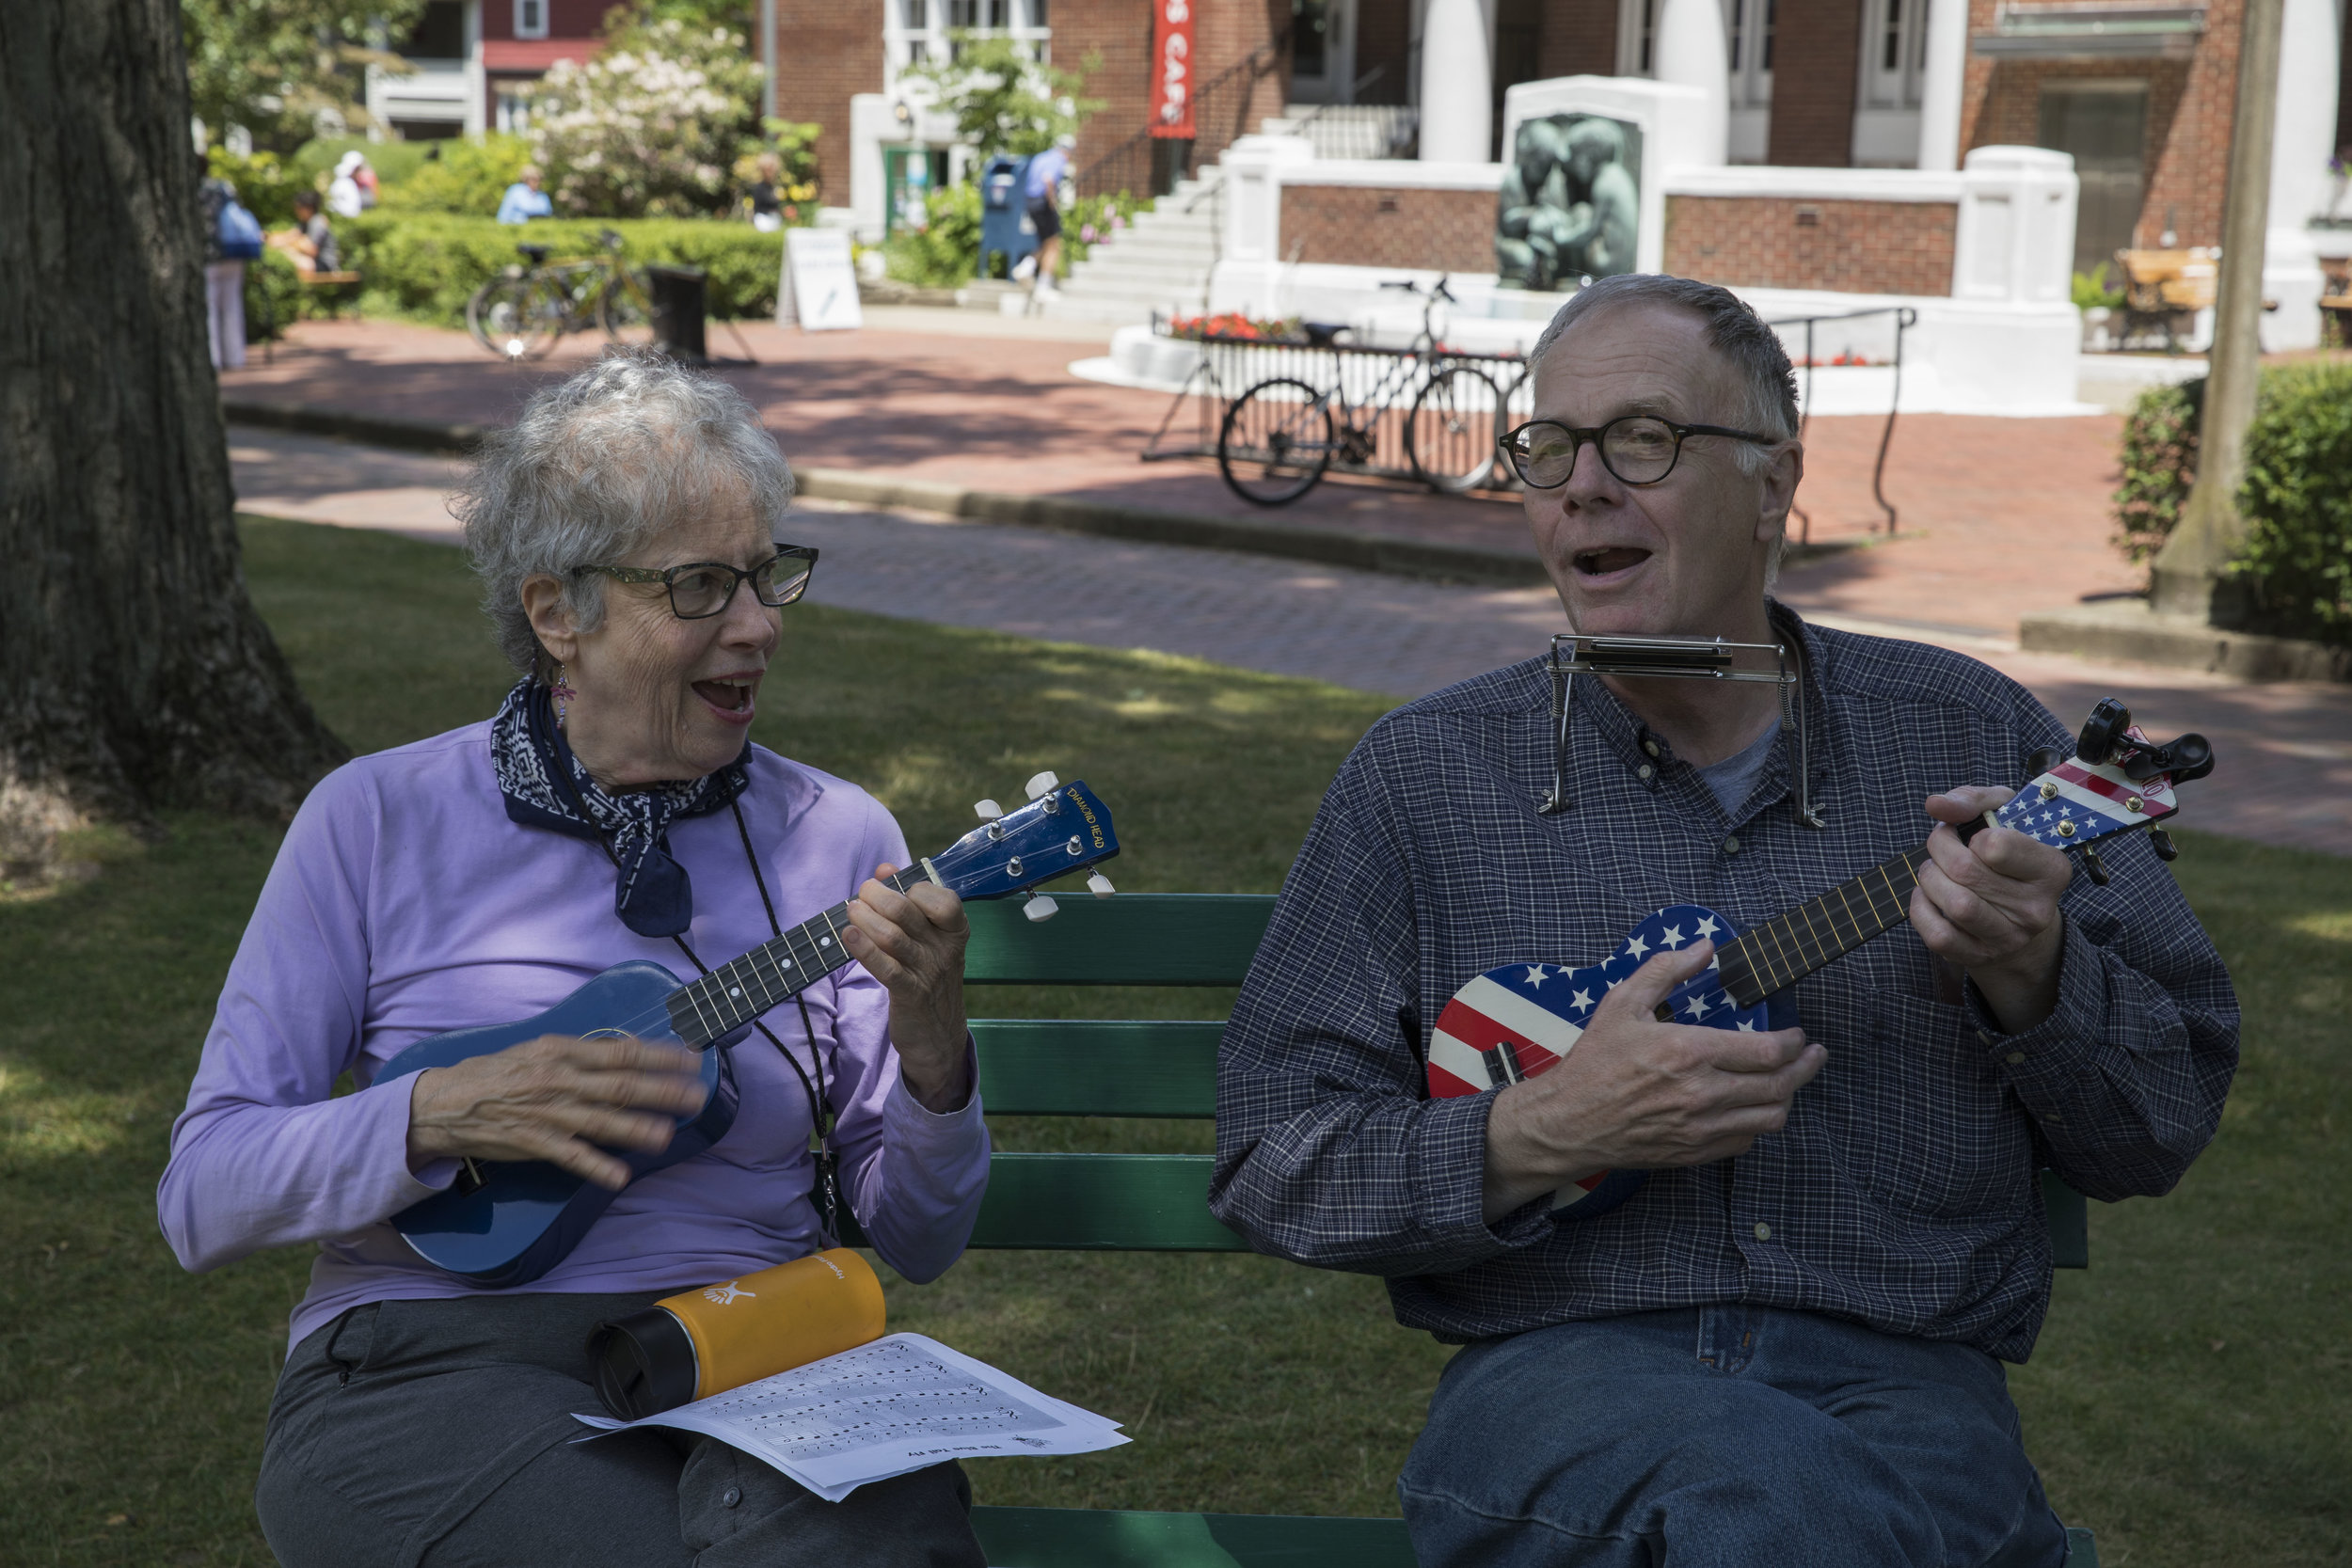  Bobby Nehman, right, teaches Dean Johnson how to play "The Blue Tail Fly" on the ukulele on Tuesday, July 18, 2017.&nbsp; 